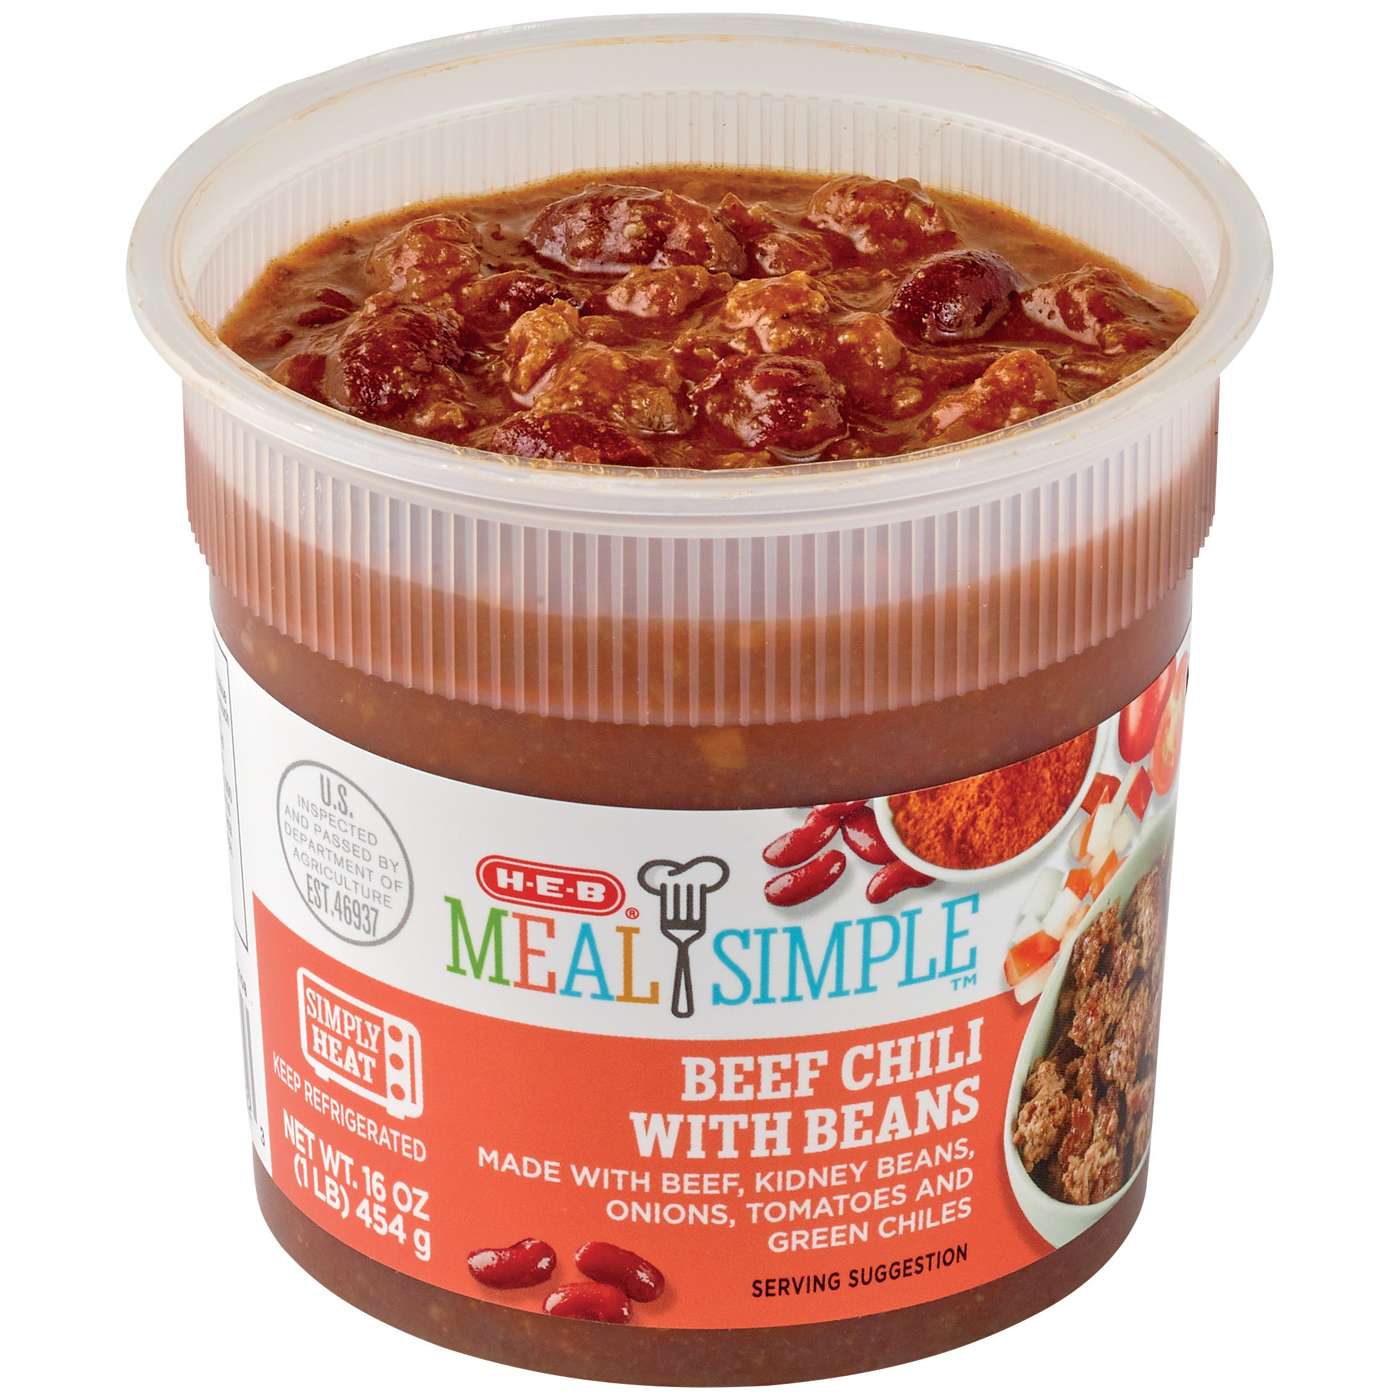 Meal Simple by H-E-B Beef Chili with Beans; image 1 of 2